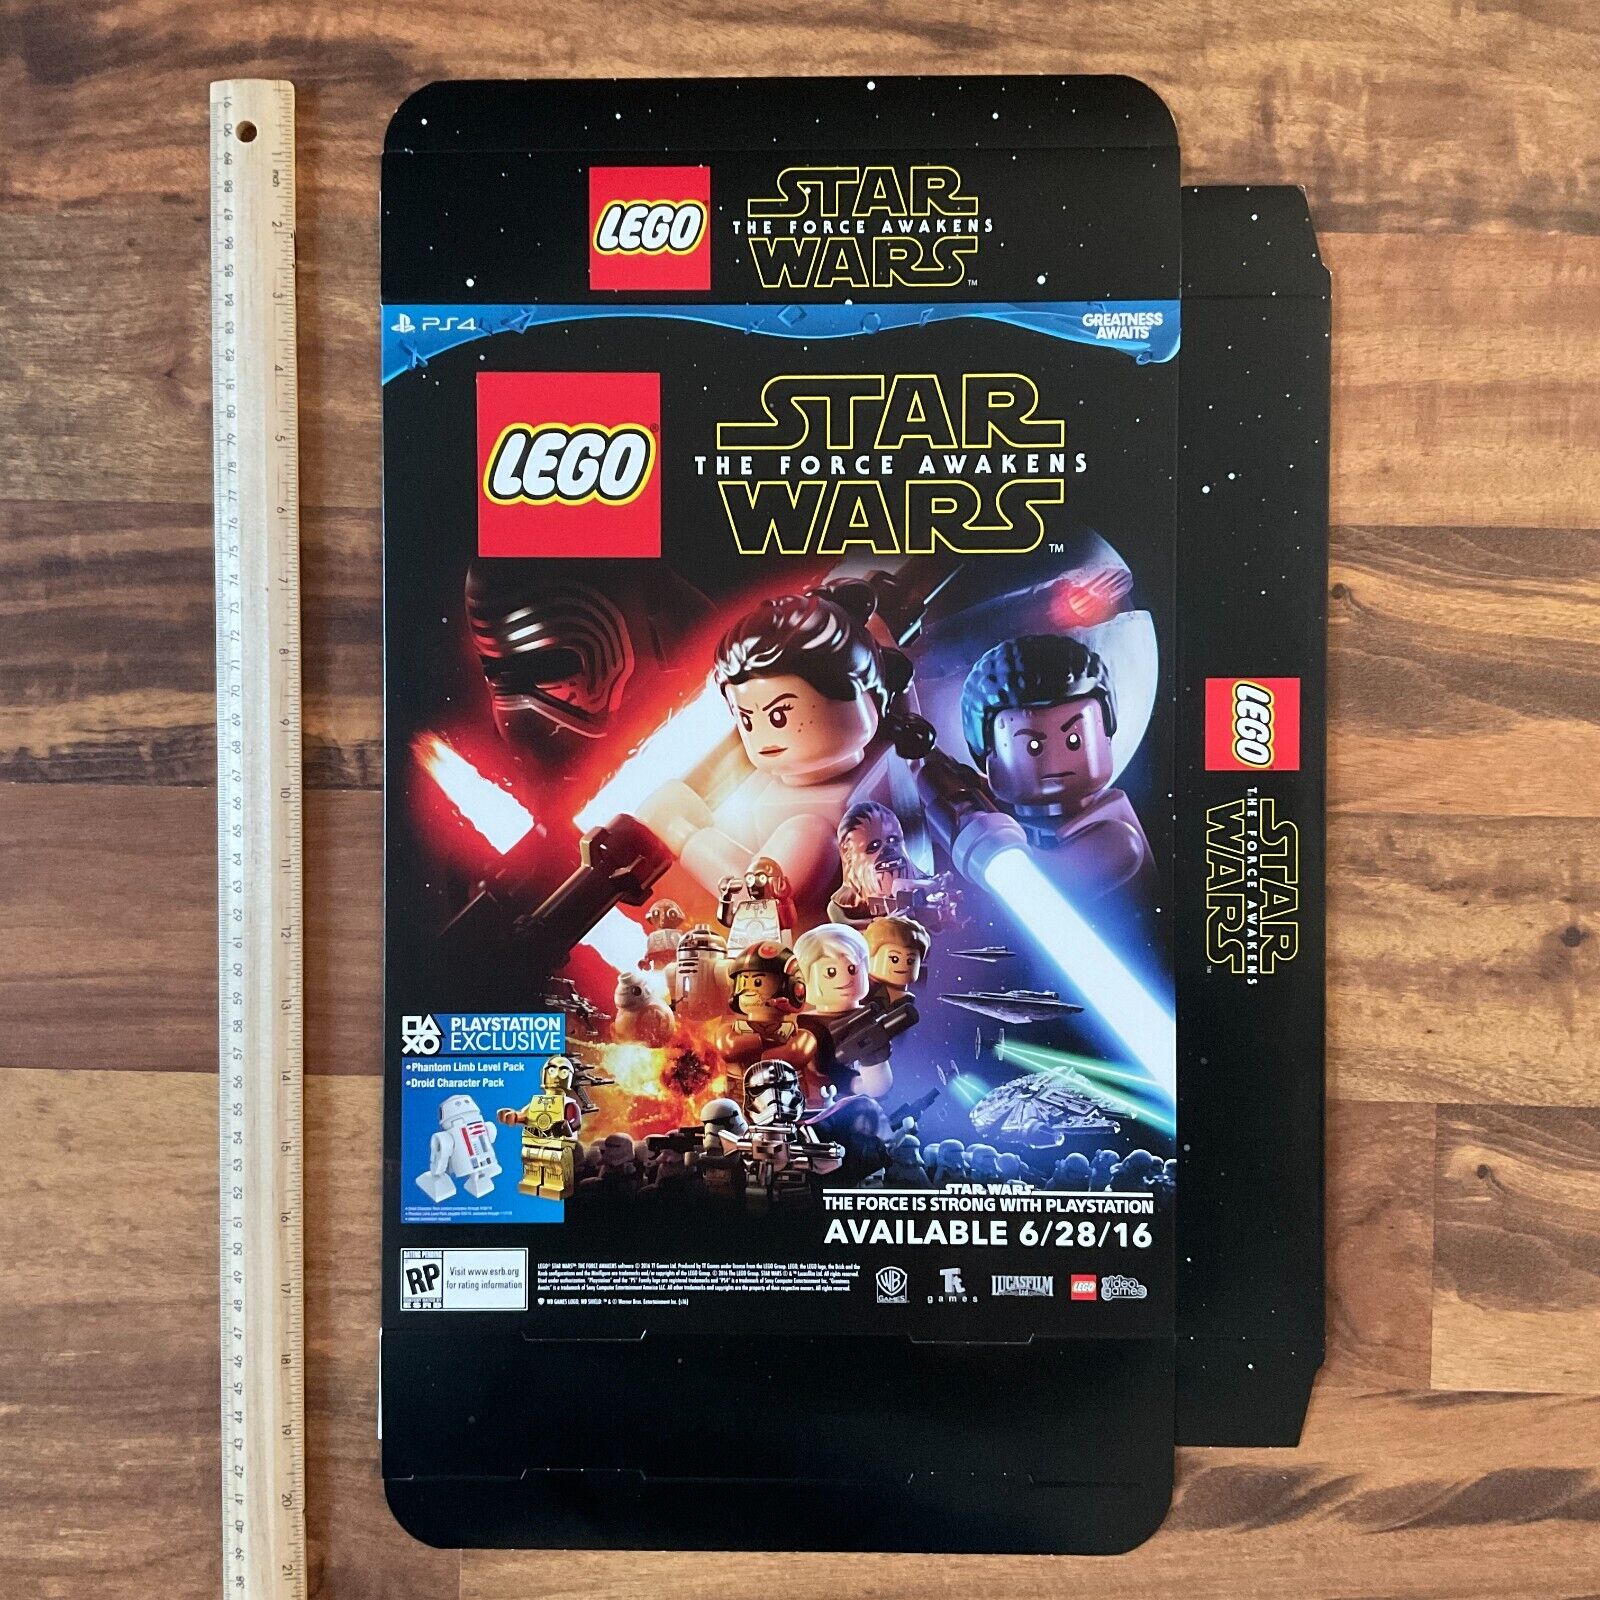 Lego Star Wars The Force Awakens 2016 Video Game Store Display Promo Box